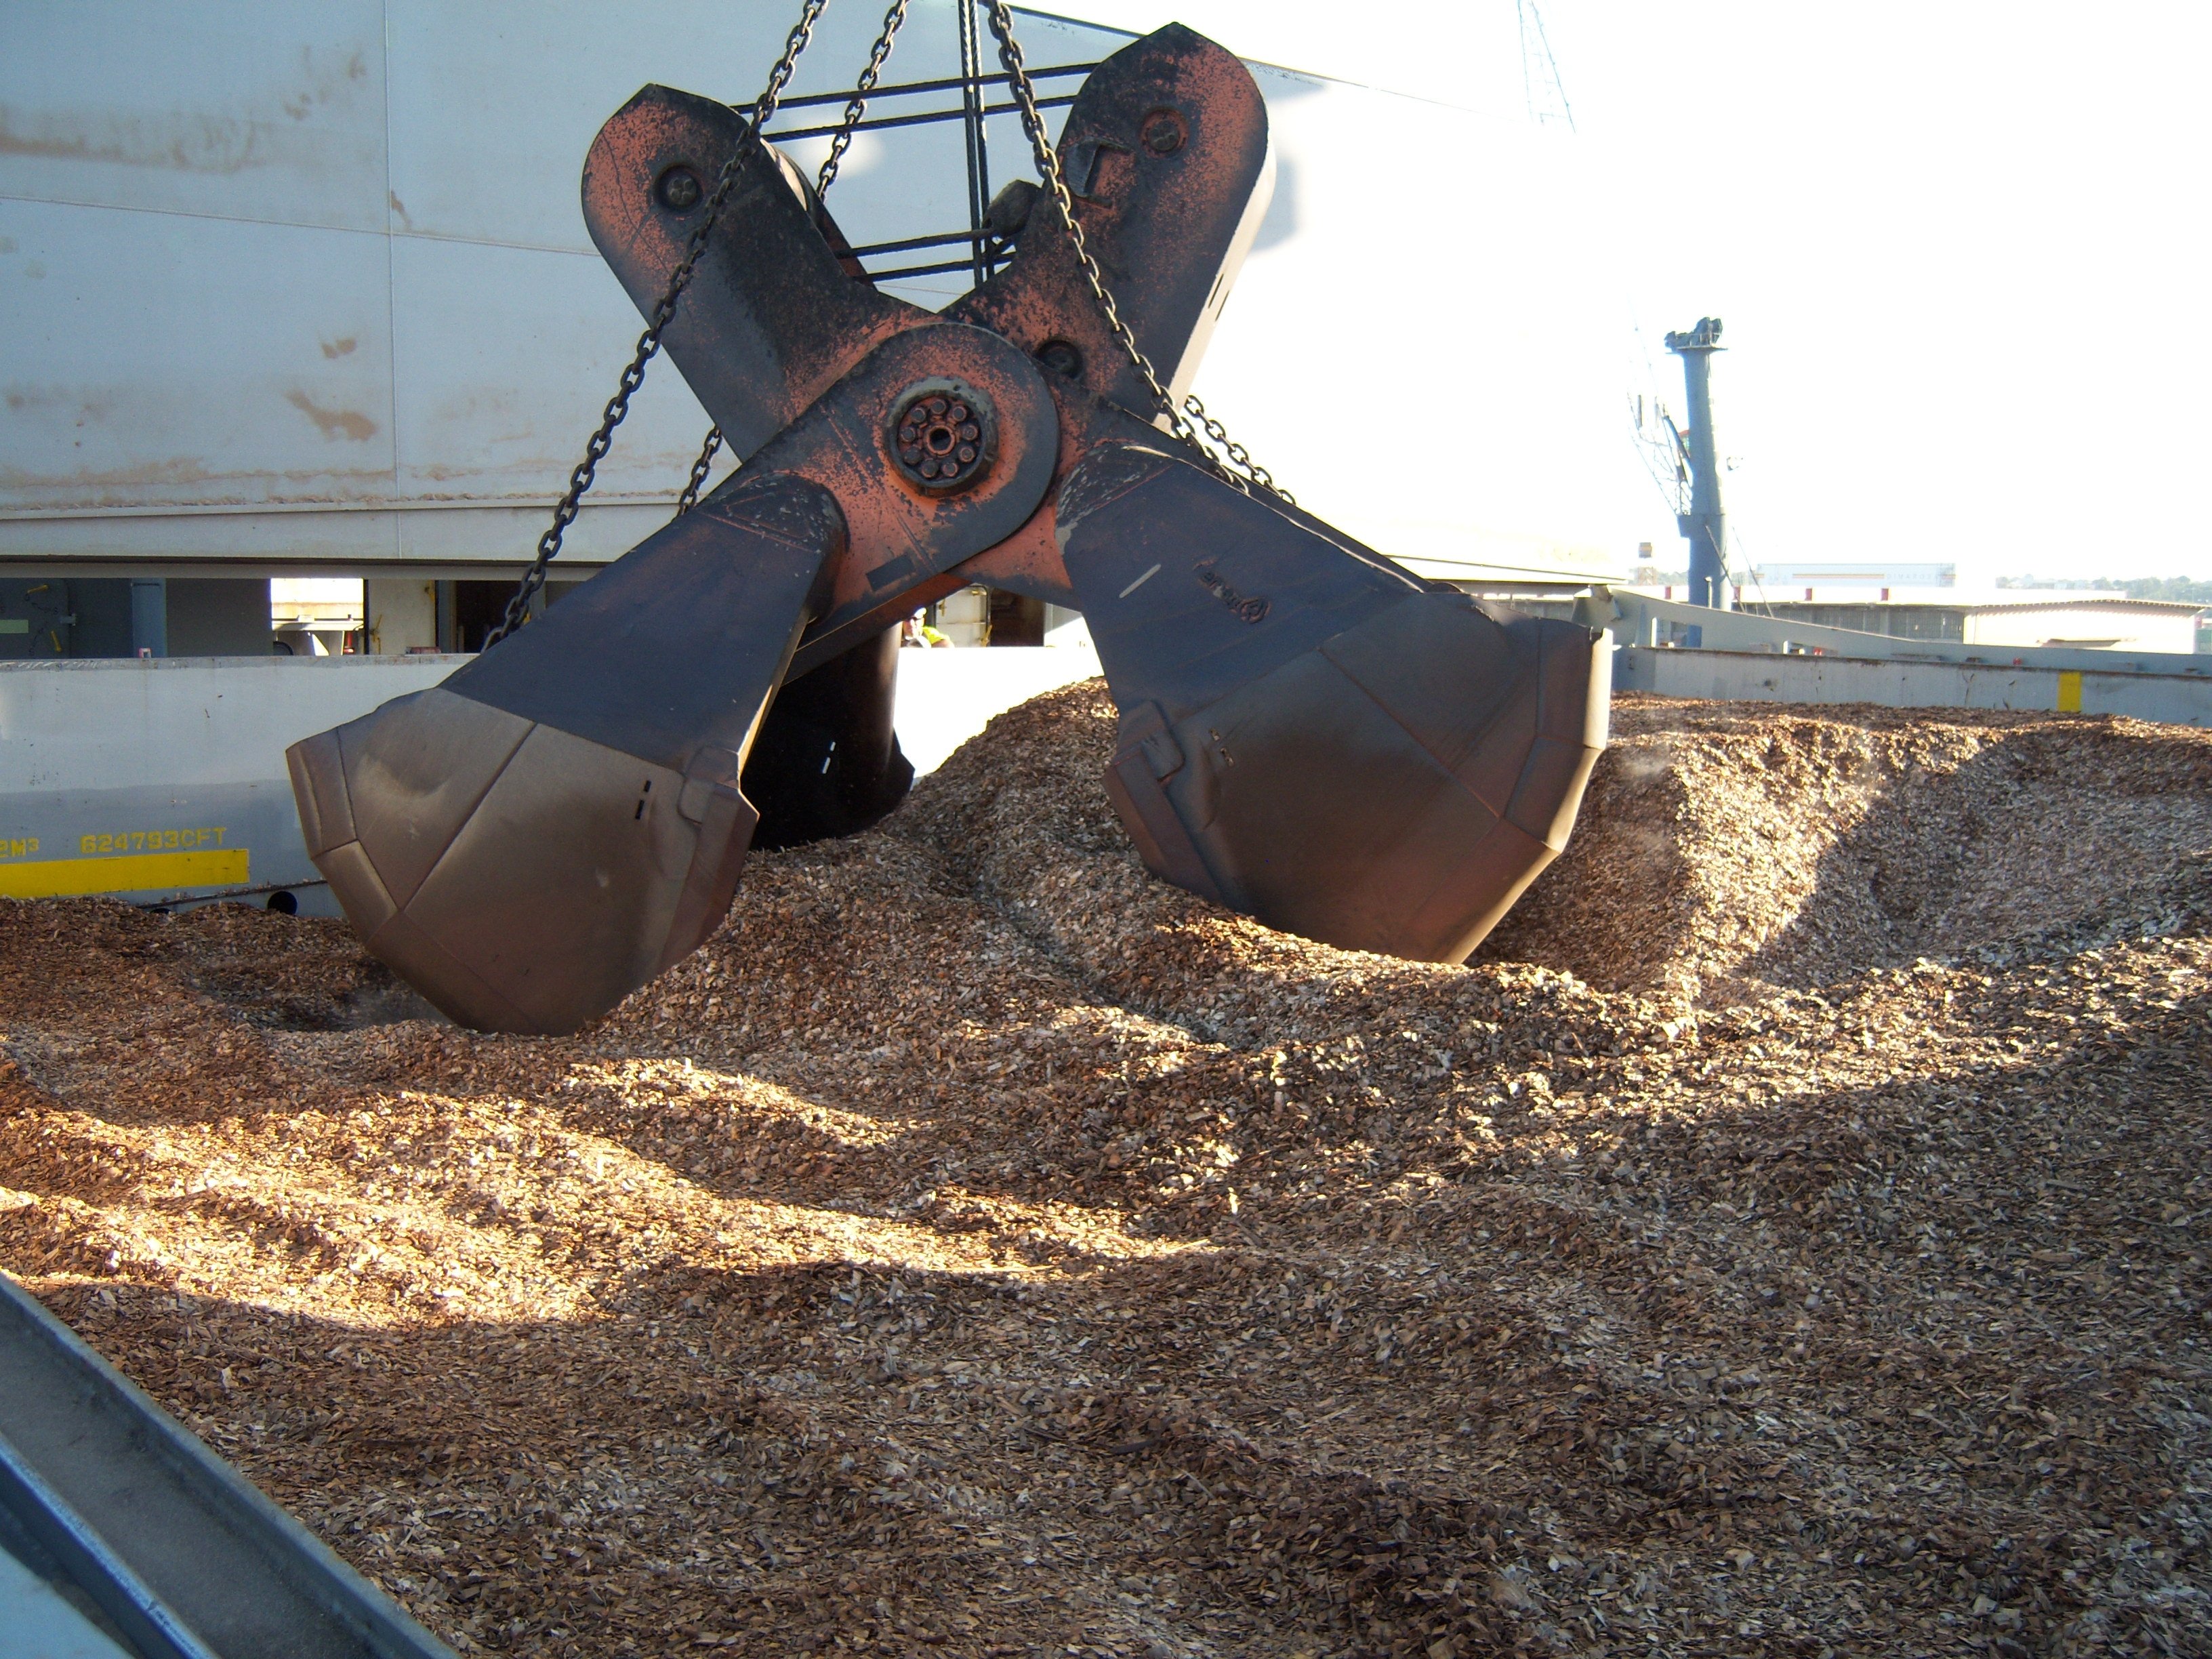 Free digging wood chips with scissors grab